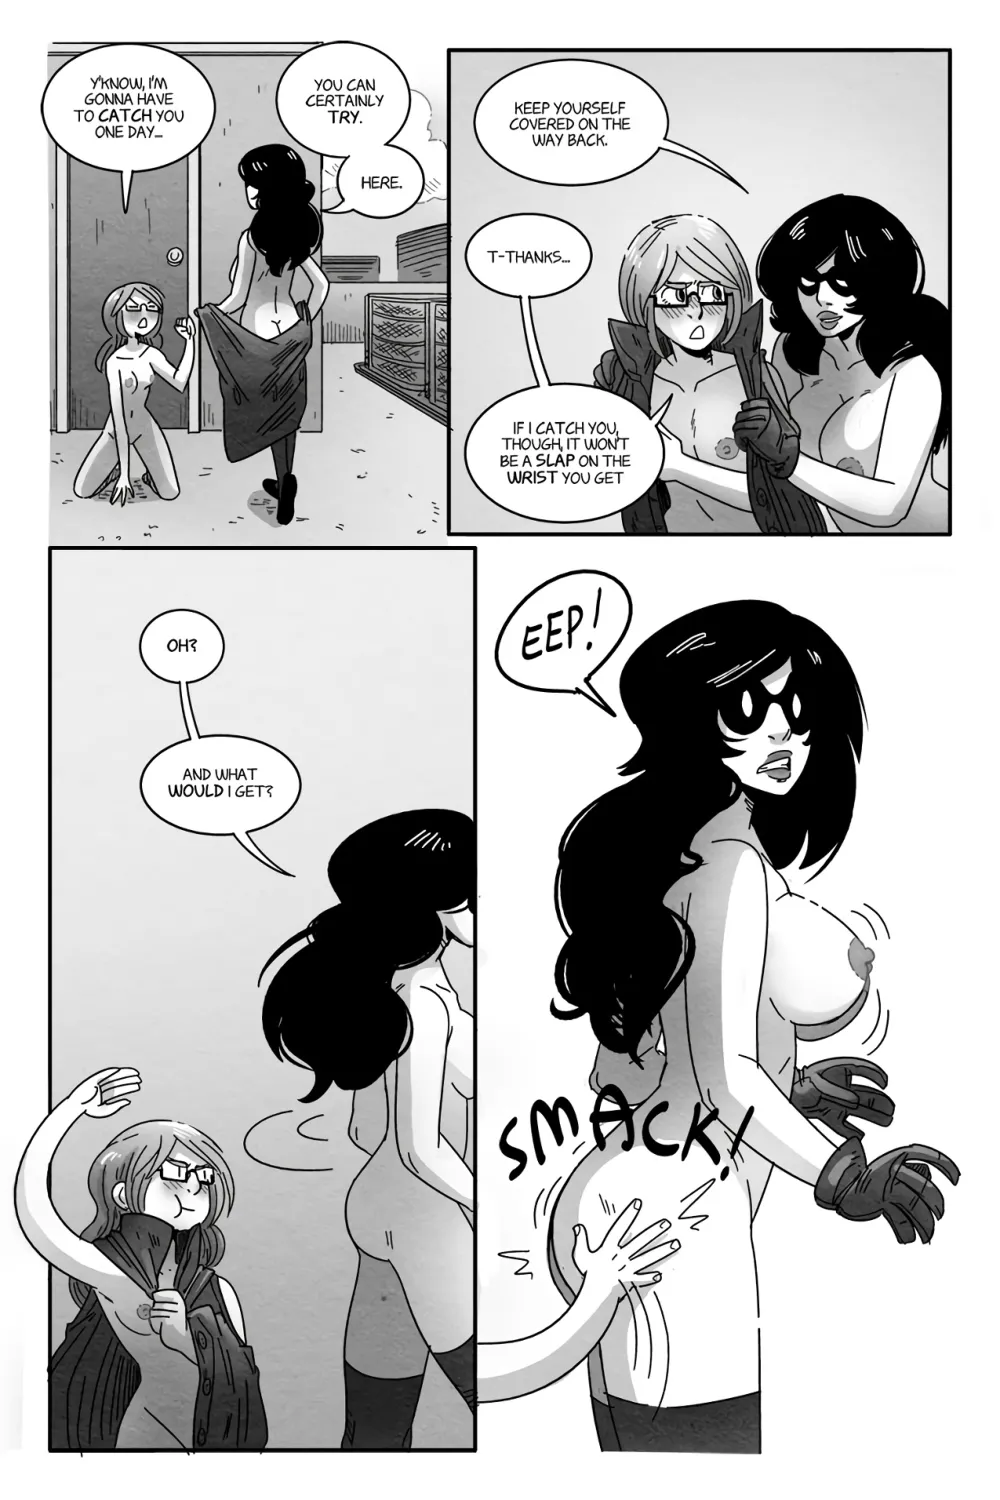 A Walk on the Wild Side - Page 17